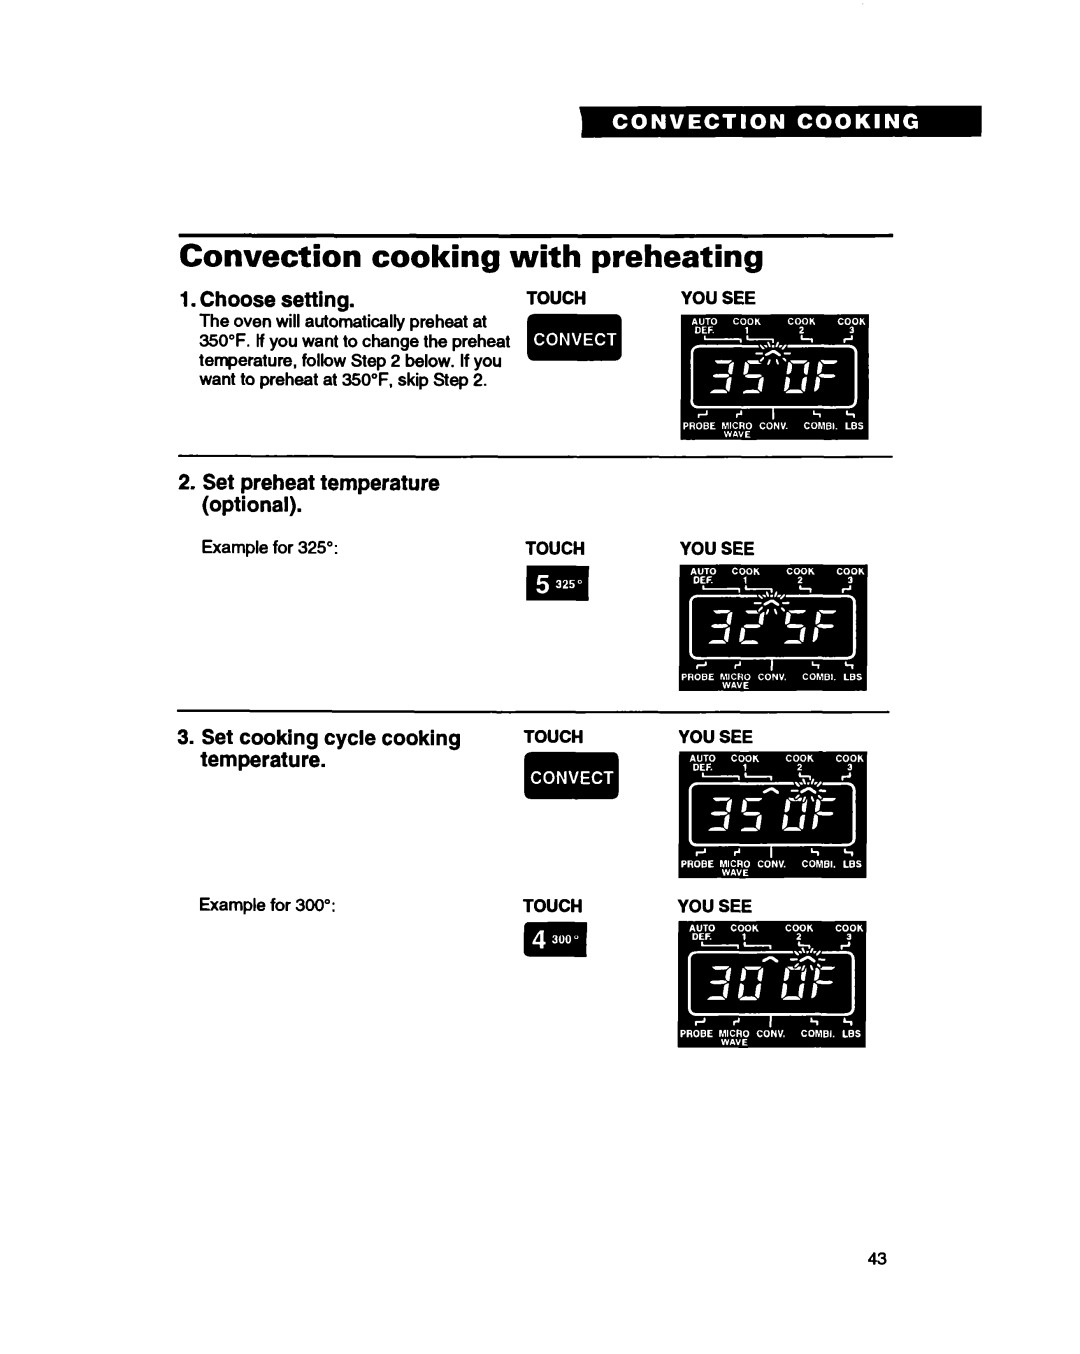 Whirlpool MC8130XA warranty Convection cooking with preheating, Set preheat temperature optional, Choose setting, Touch 